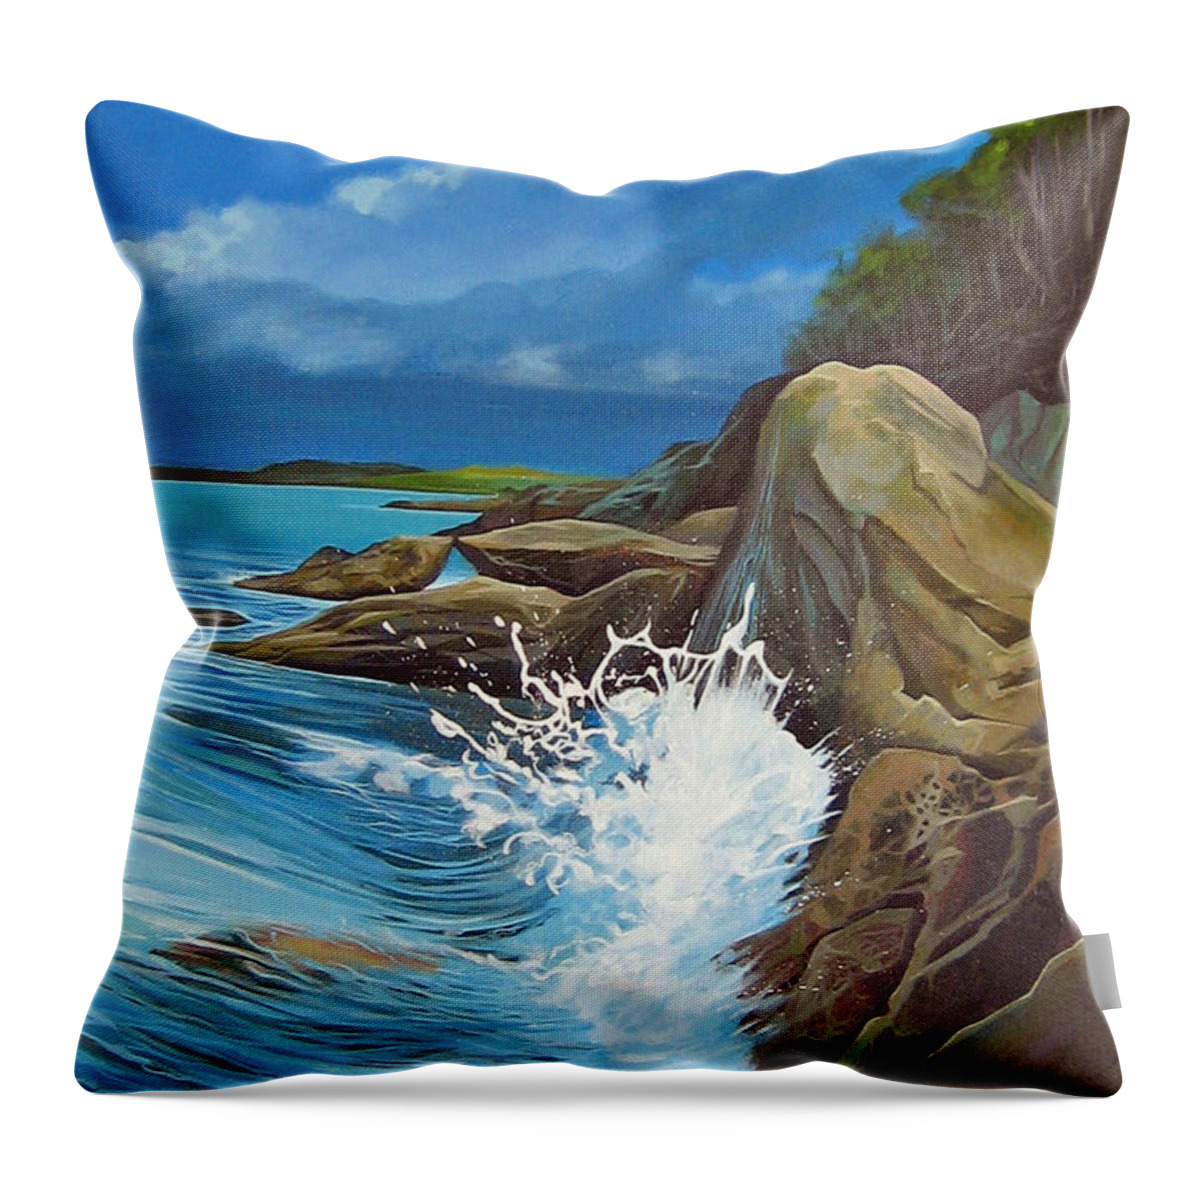 Ocean Throw Pillow featuring the painting Cerulean by Hunter Jay